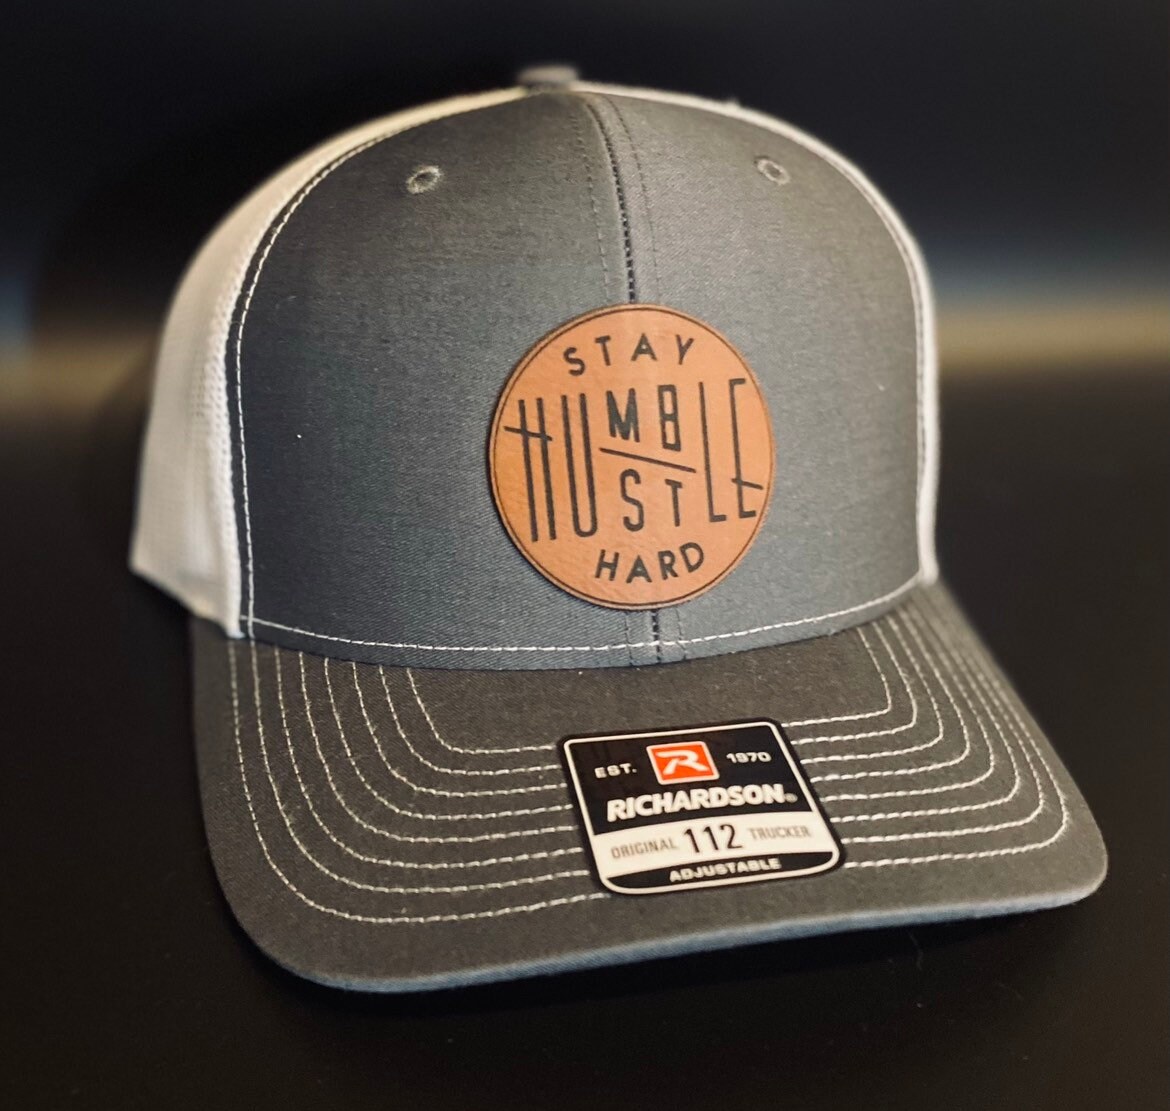 Stay Humble Hustle Hard Hat Patch, Cap Patches, Hat With Patches, Hat  Patches, Cap Patch for Women, Custom Cap Patches, Trucker Hat Patches 